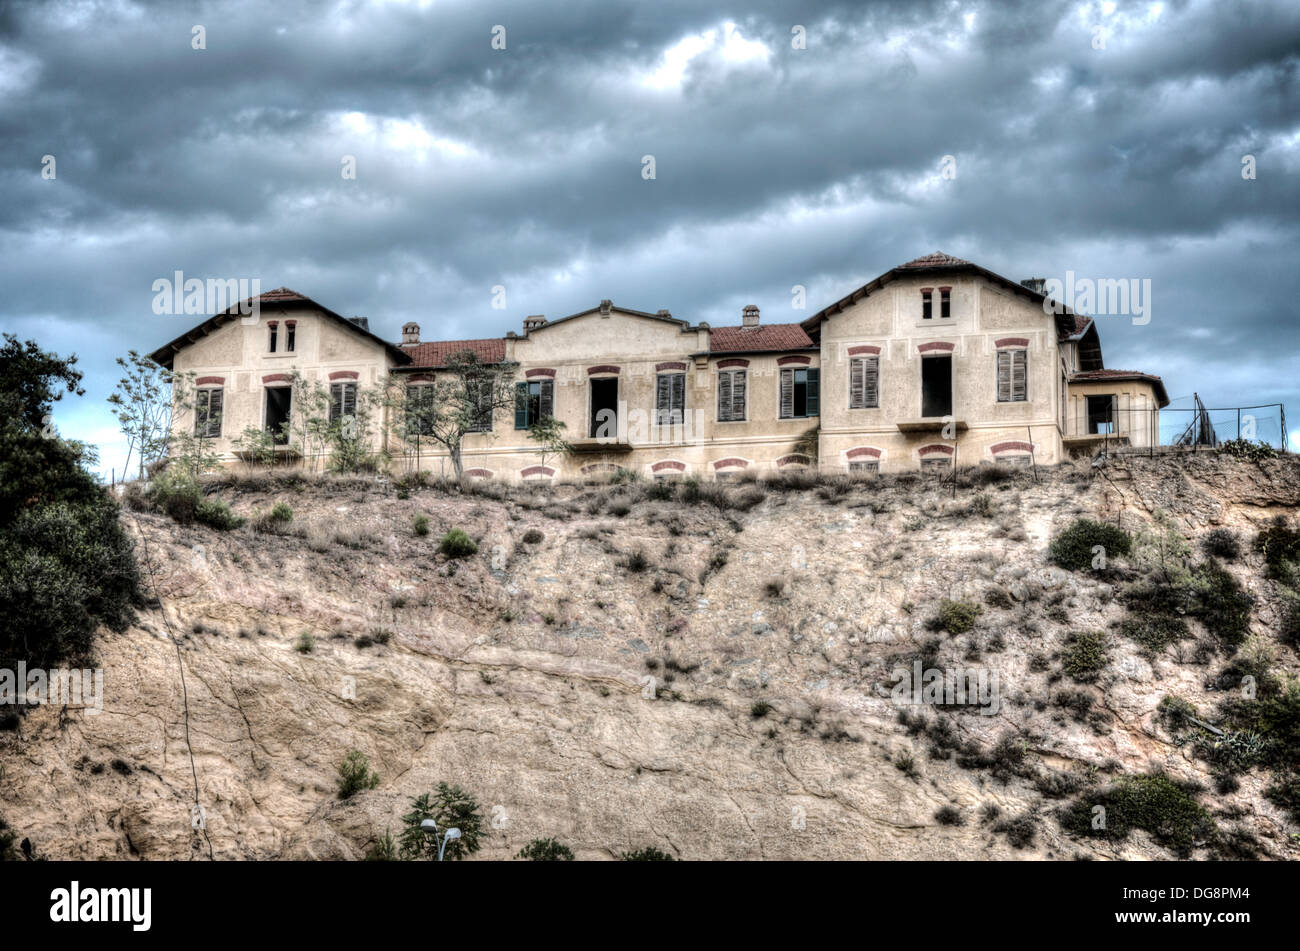 Old and abandoned house on the hill in hdr Stock Photo